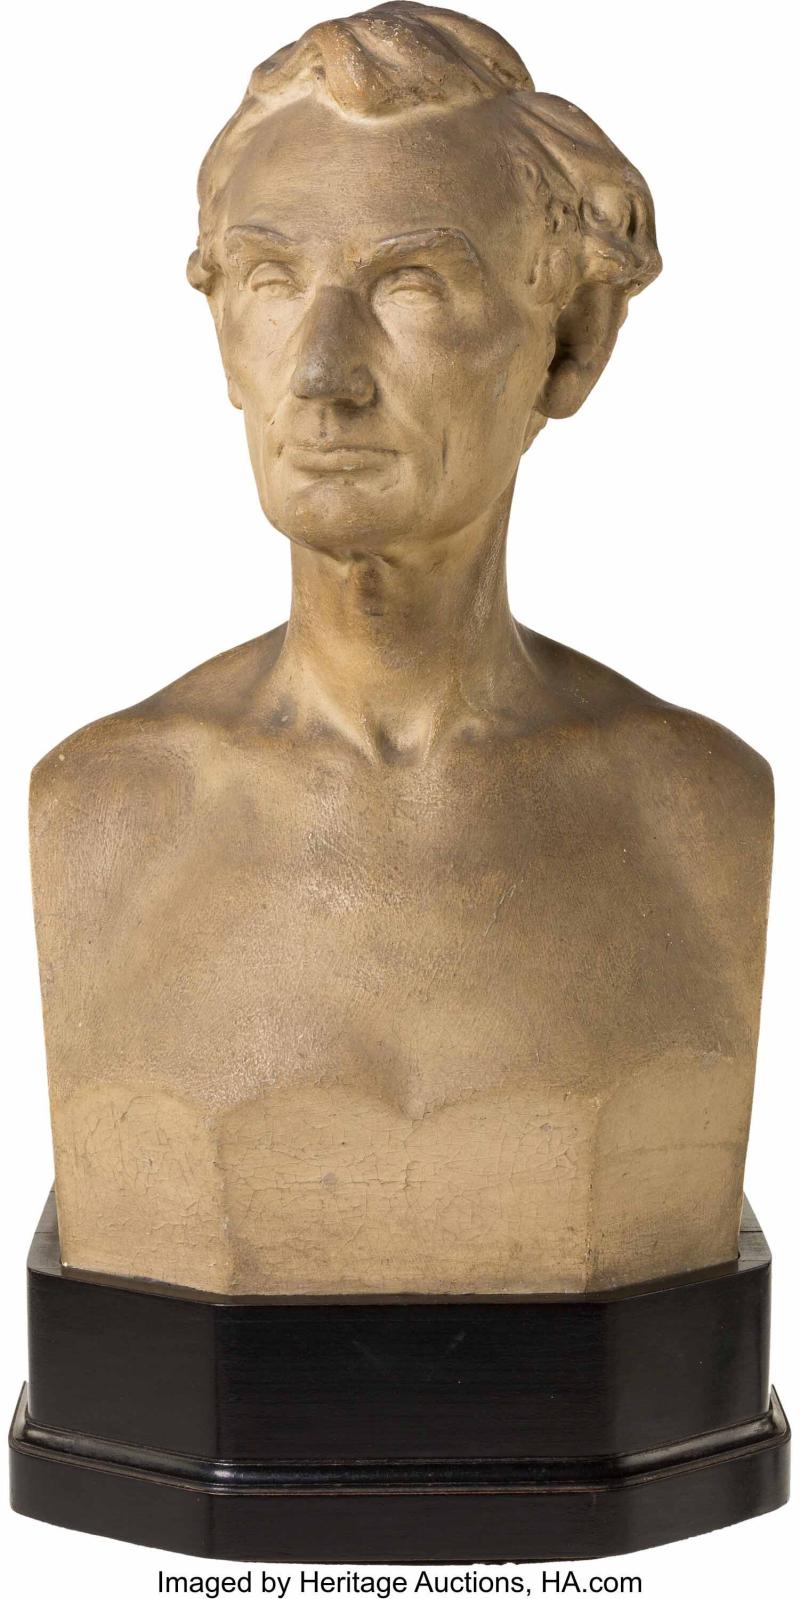 Leonard Volk, Abraham Lincoln, 1860, 15 inches tall including the base, and 12 1/2 inches tall without the base.Image courtesy of Heritage